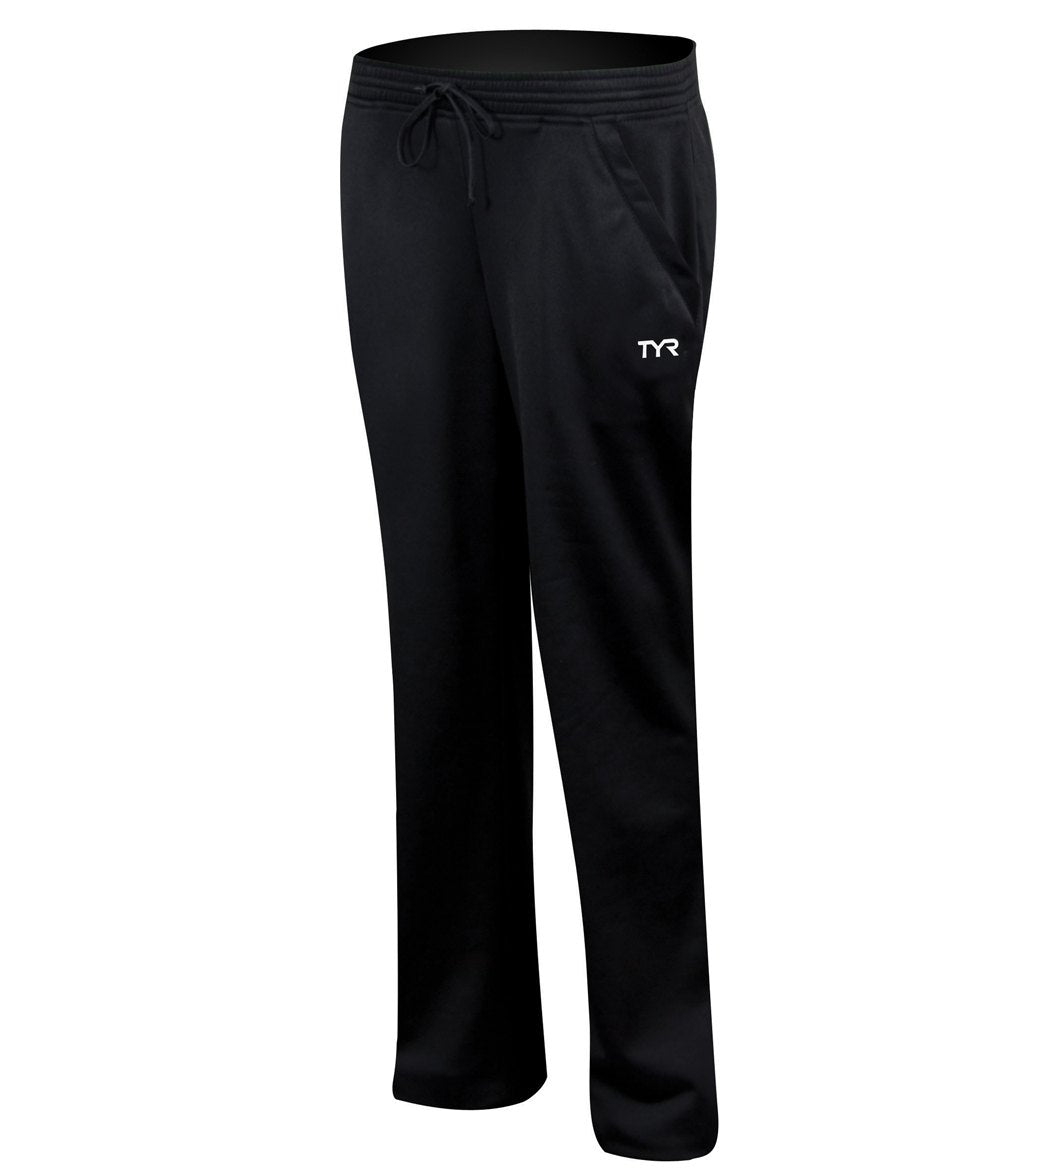 TYR Alliance Victory Women's Warm Up Pants - Black Xxl Polyester - Swimoutlet.com